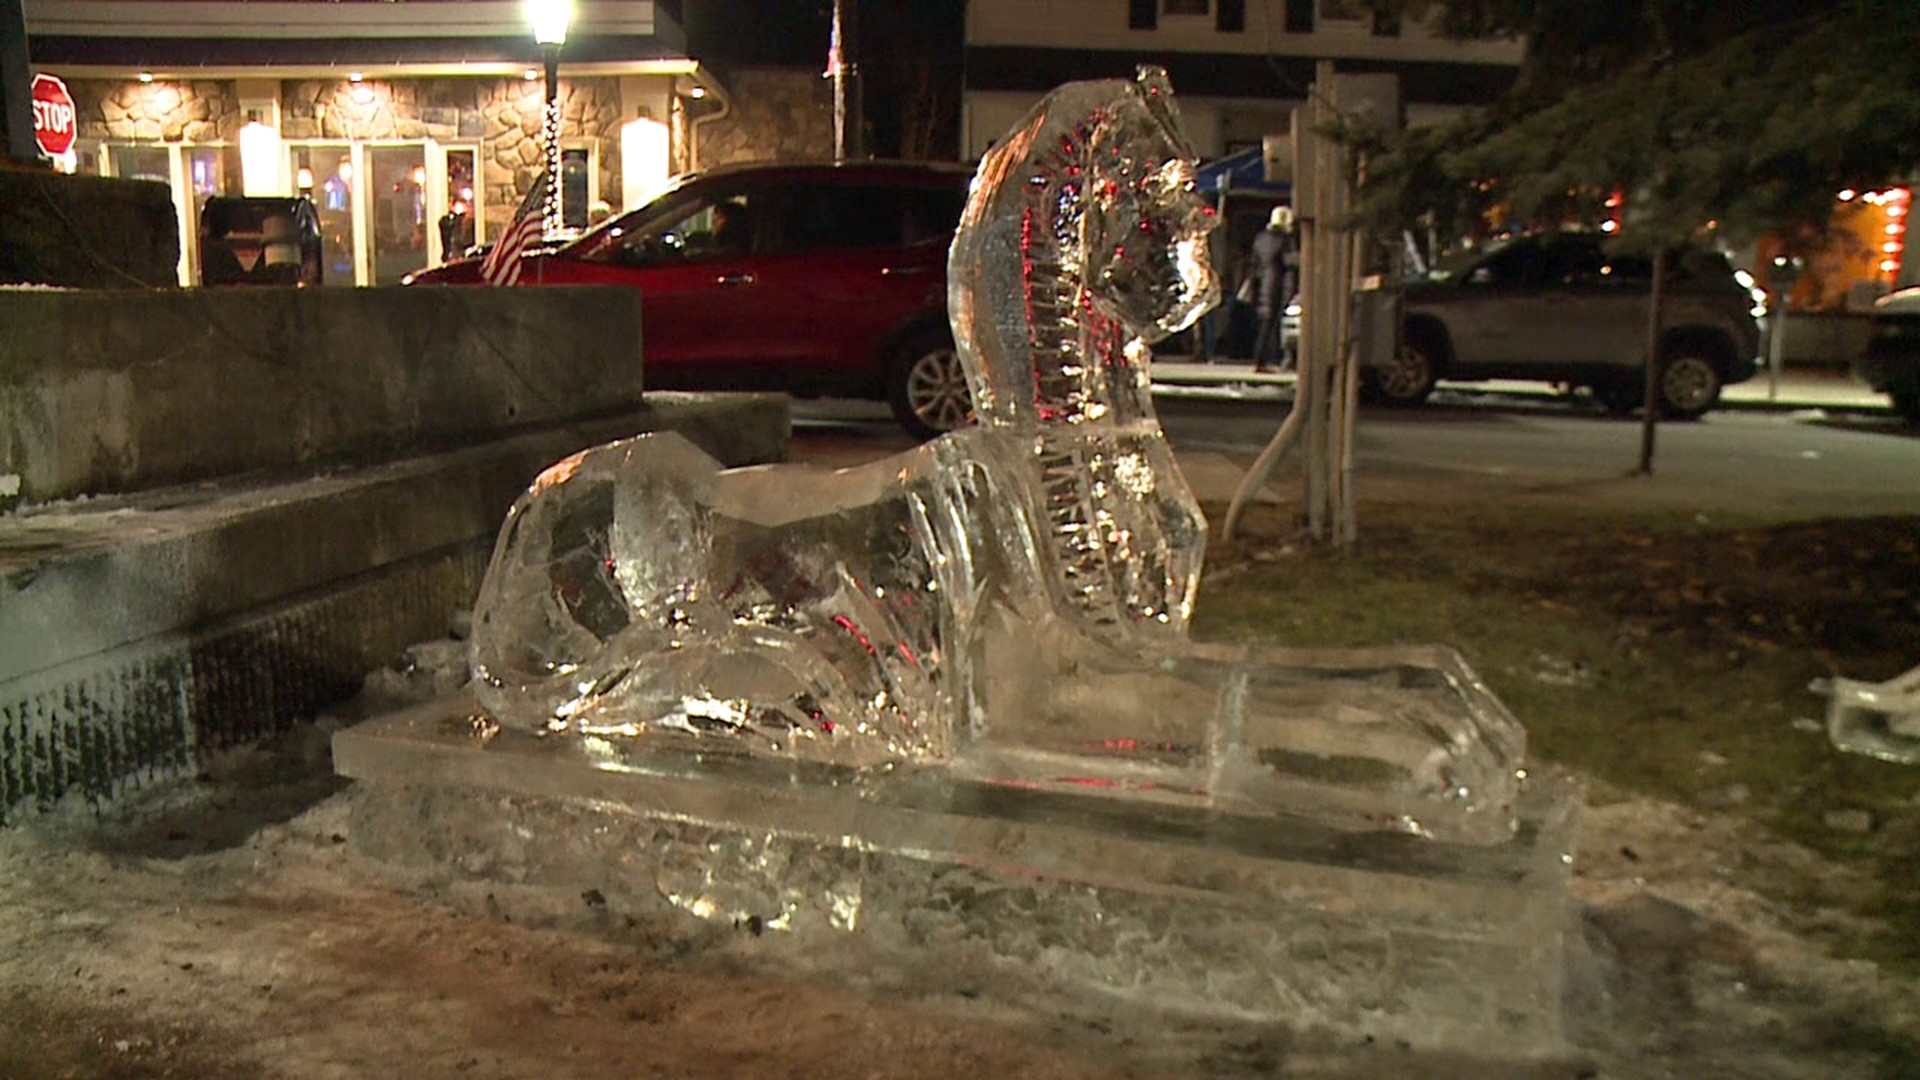 The 19th Annual Festival of Ice kicked off at 7 p.m. Friday night in the borough.